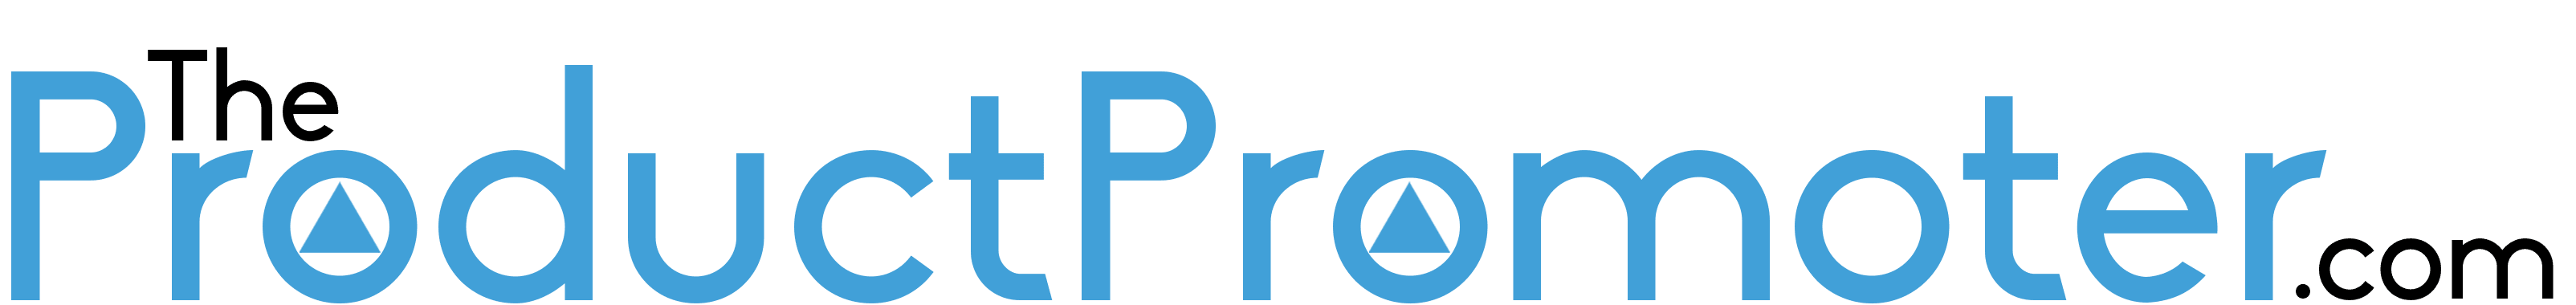 The Product Promoter